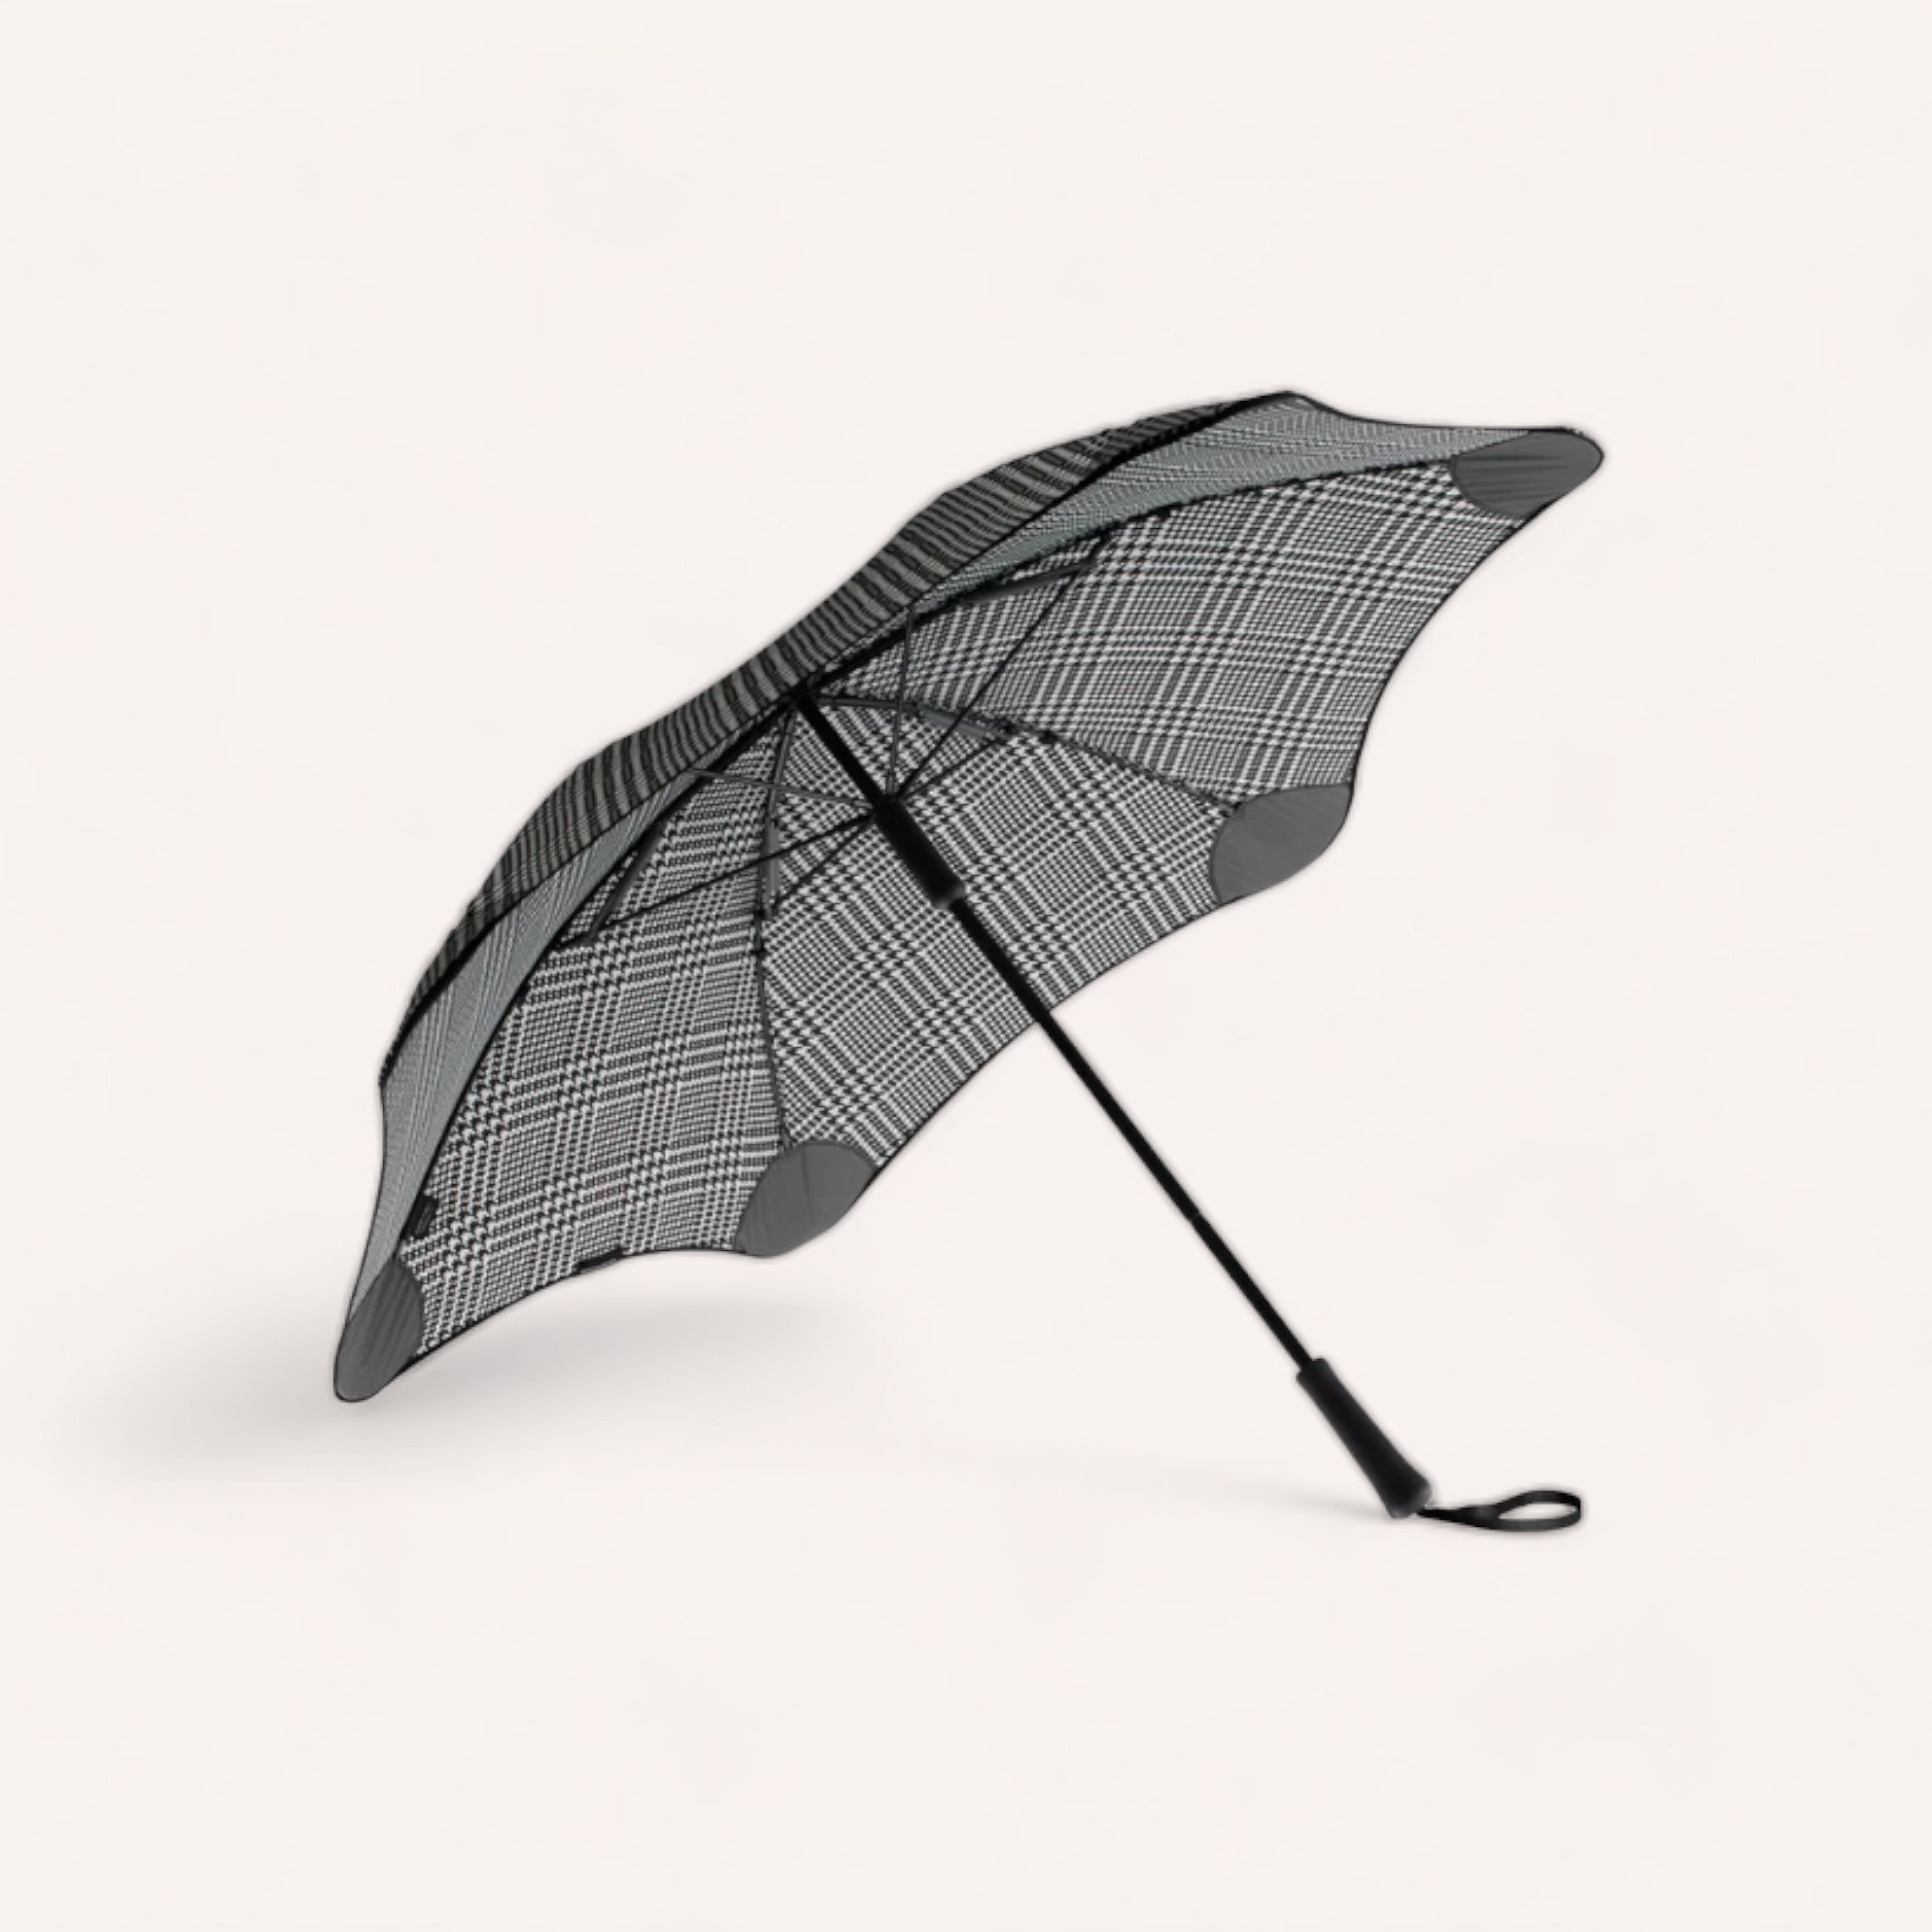 A compact, BLUNT Metro Umbrella Houndstooth - Limited Edition open against a white background.